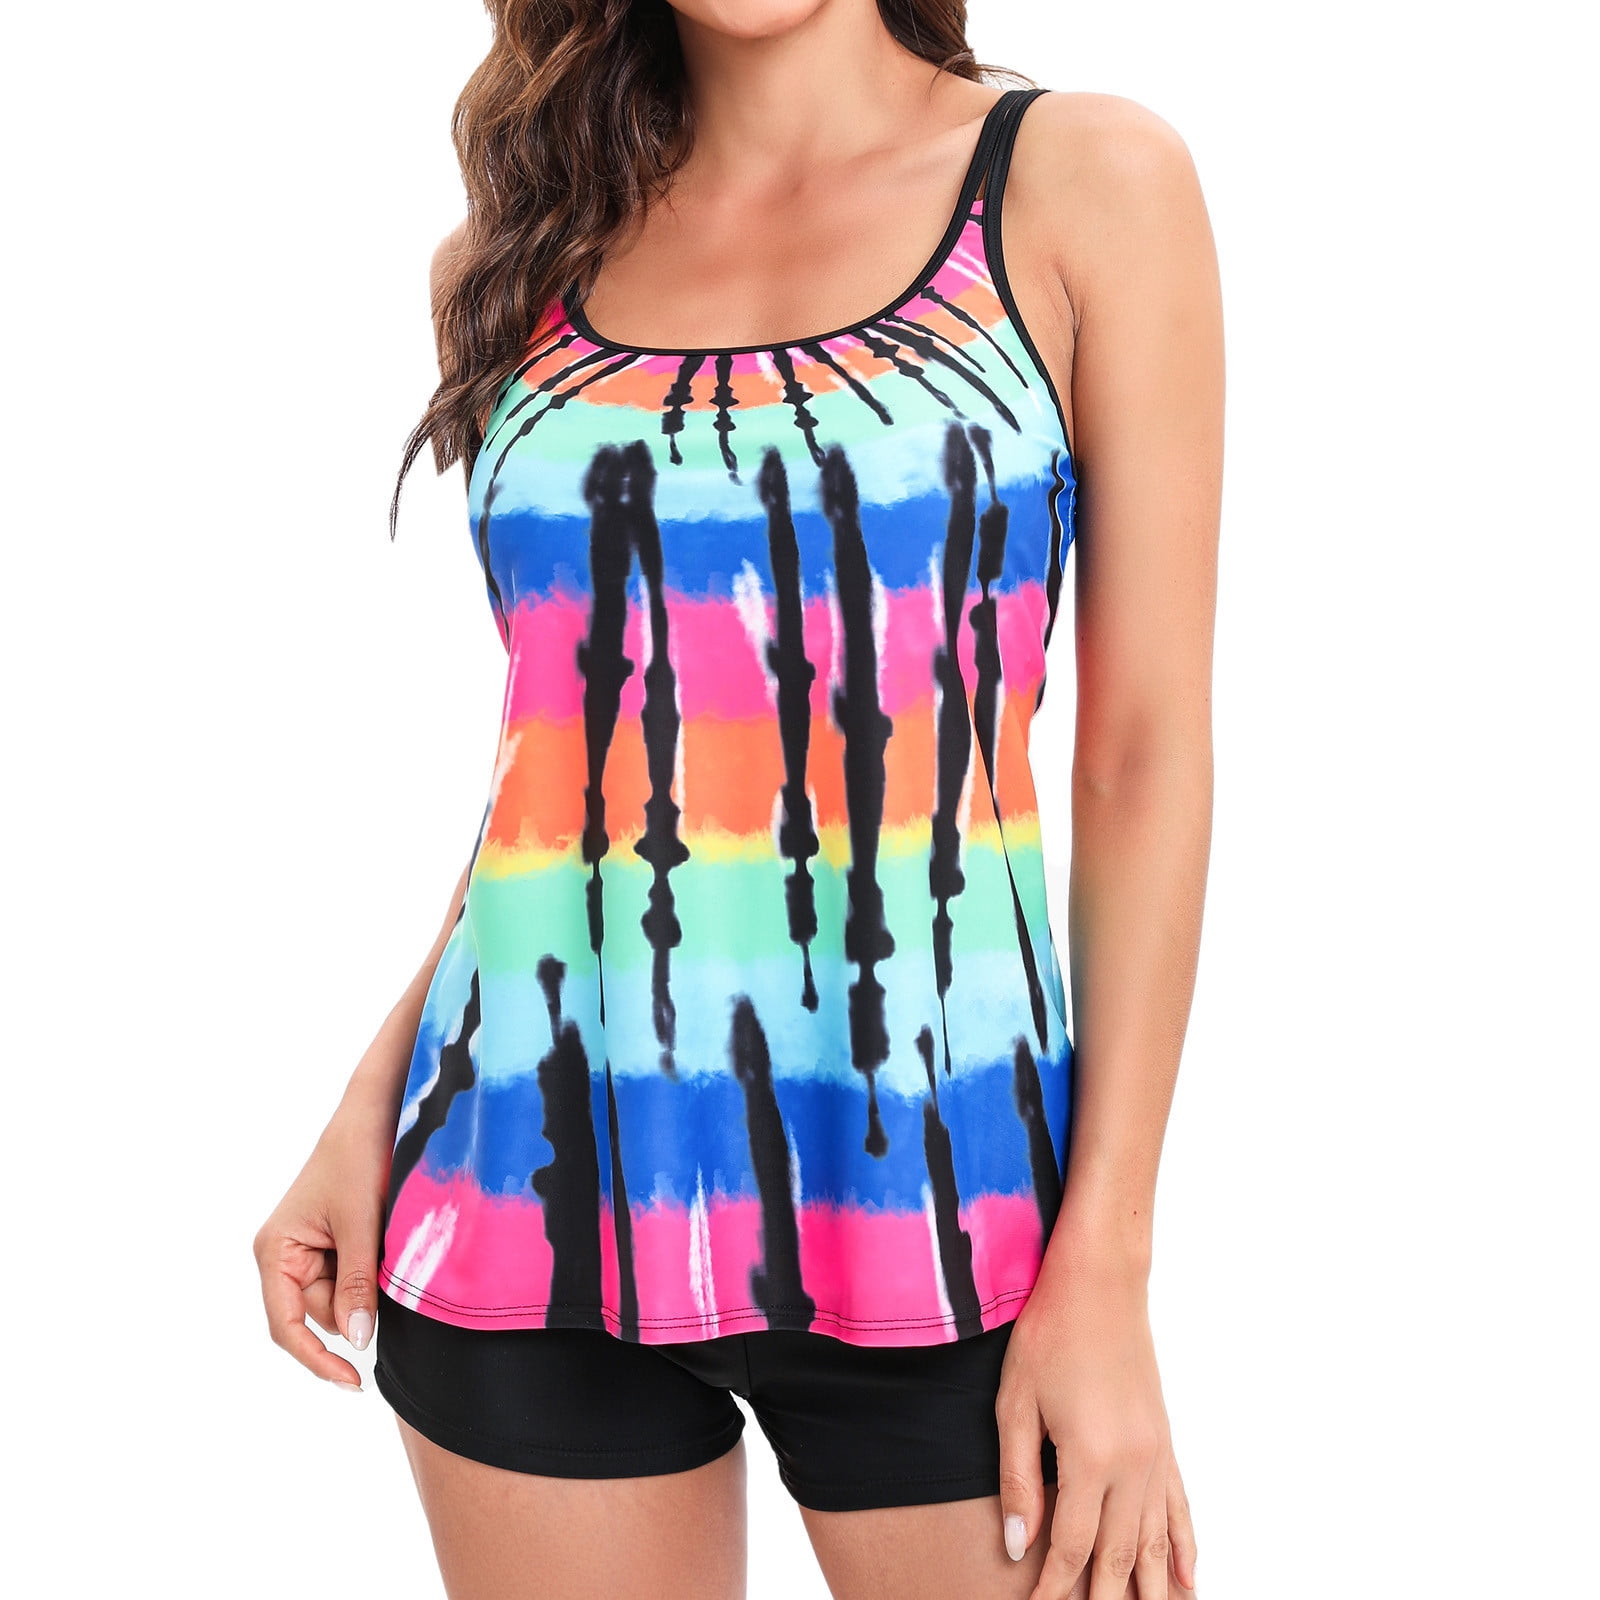 Rqyyd Reduced Women's Tie Dye Bathing Suits